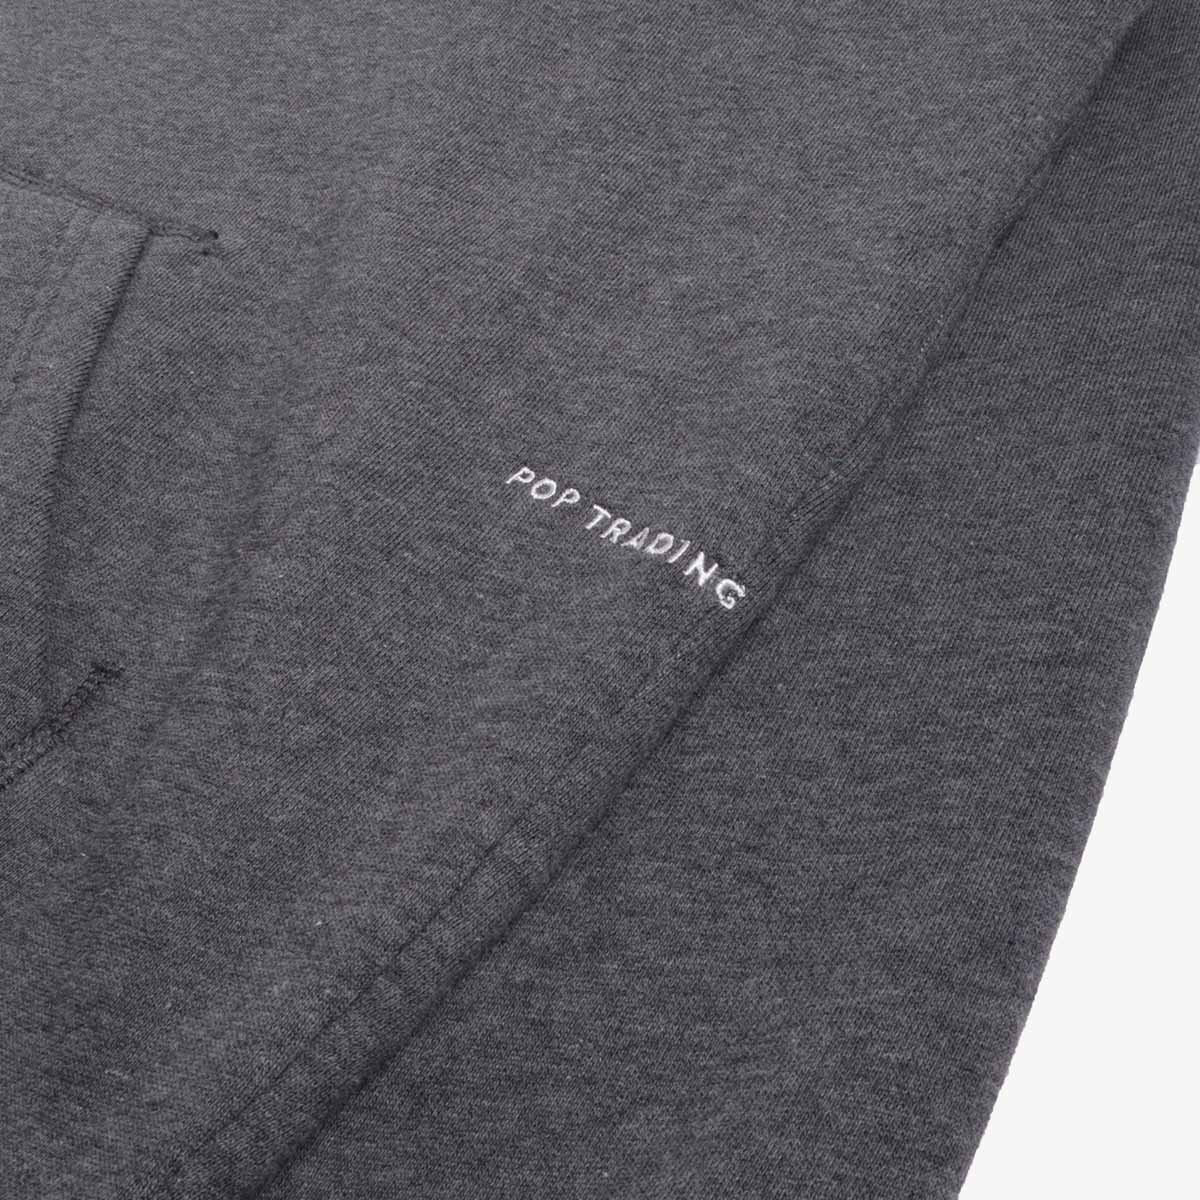 Pop Trading Company Hoodie, Charcoal Heather, Detail Shot 7